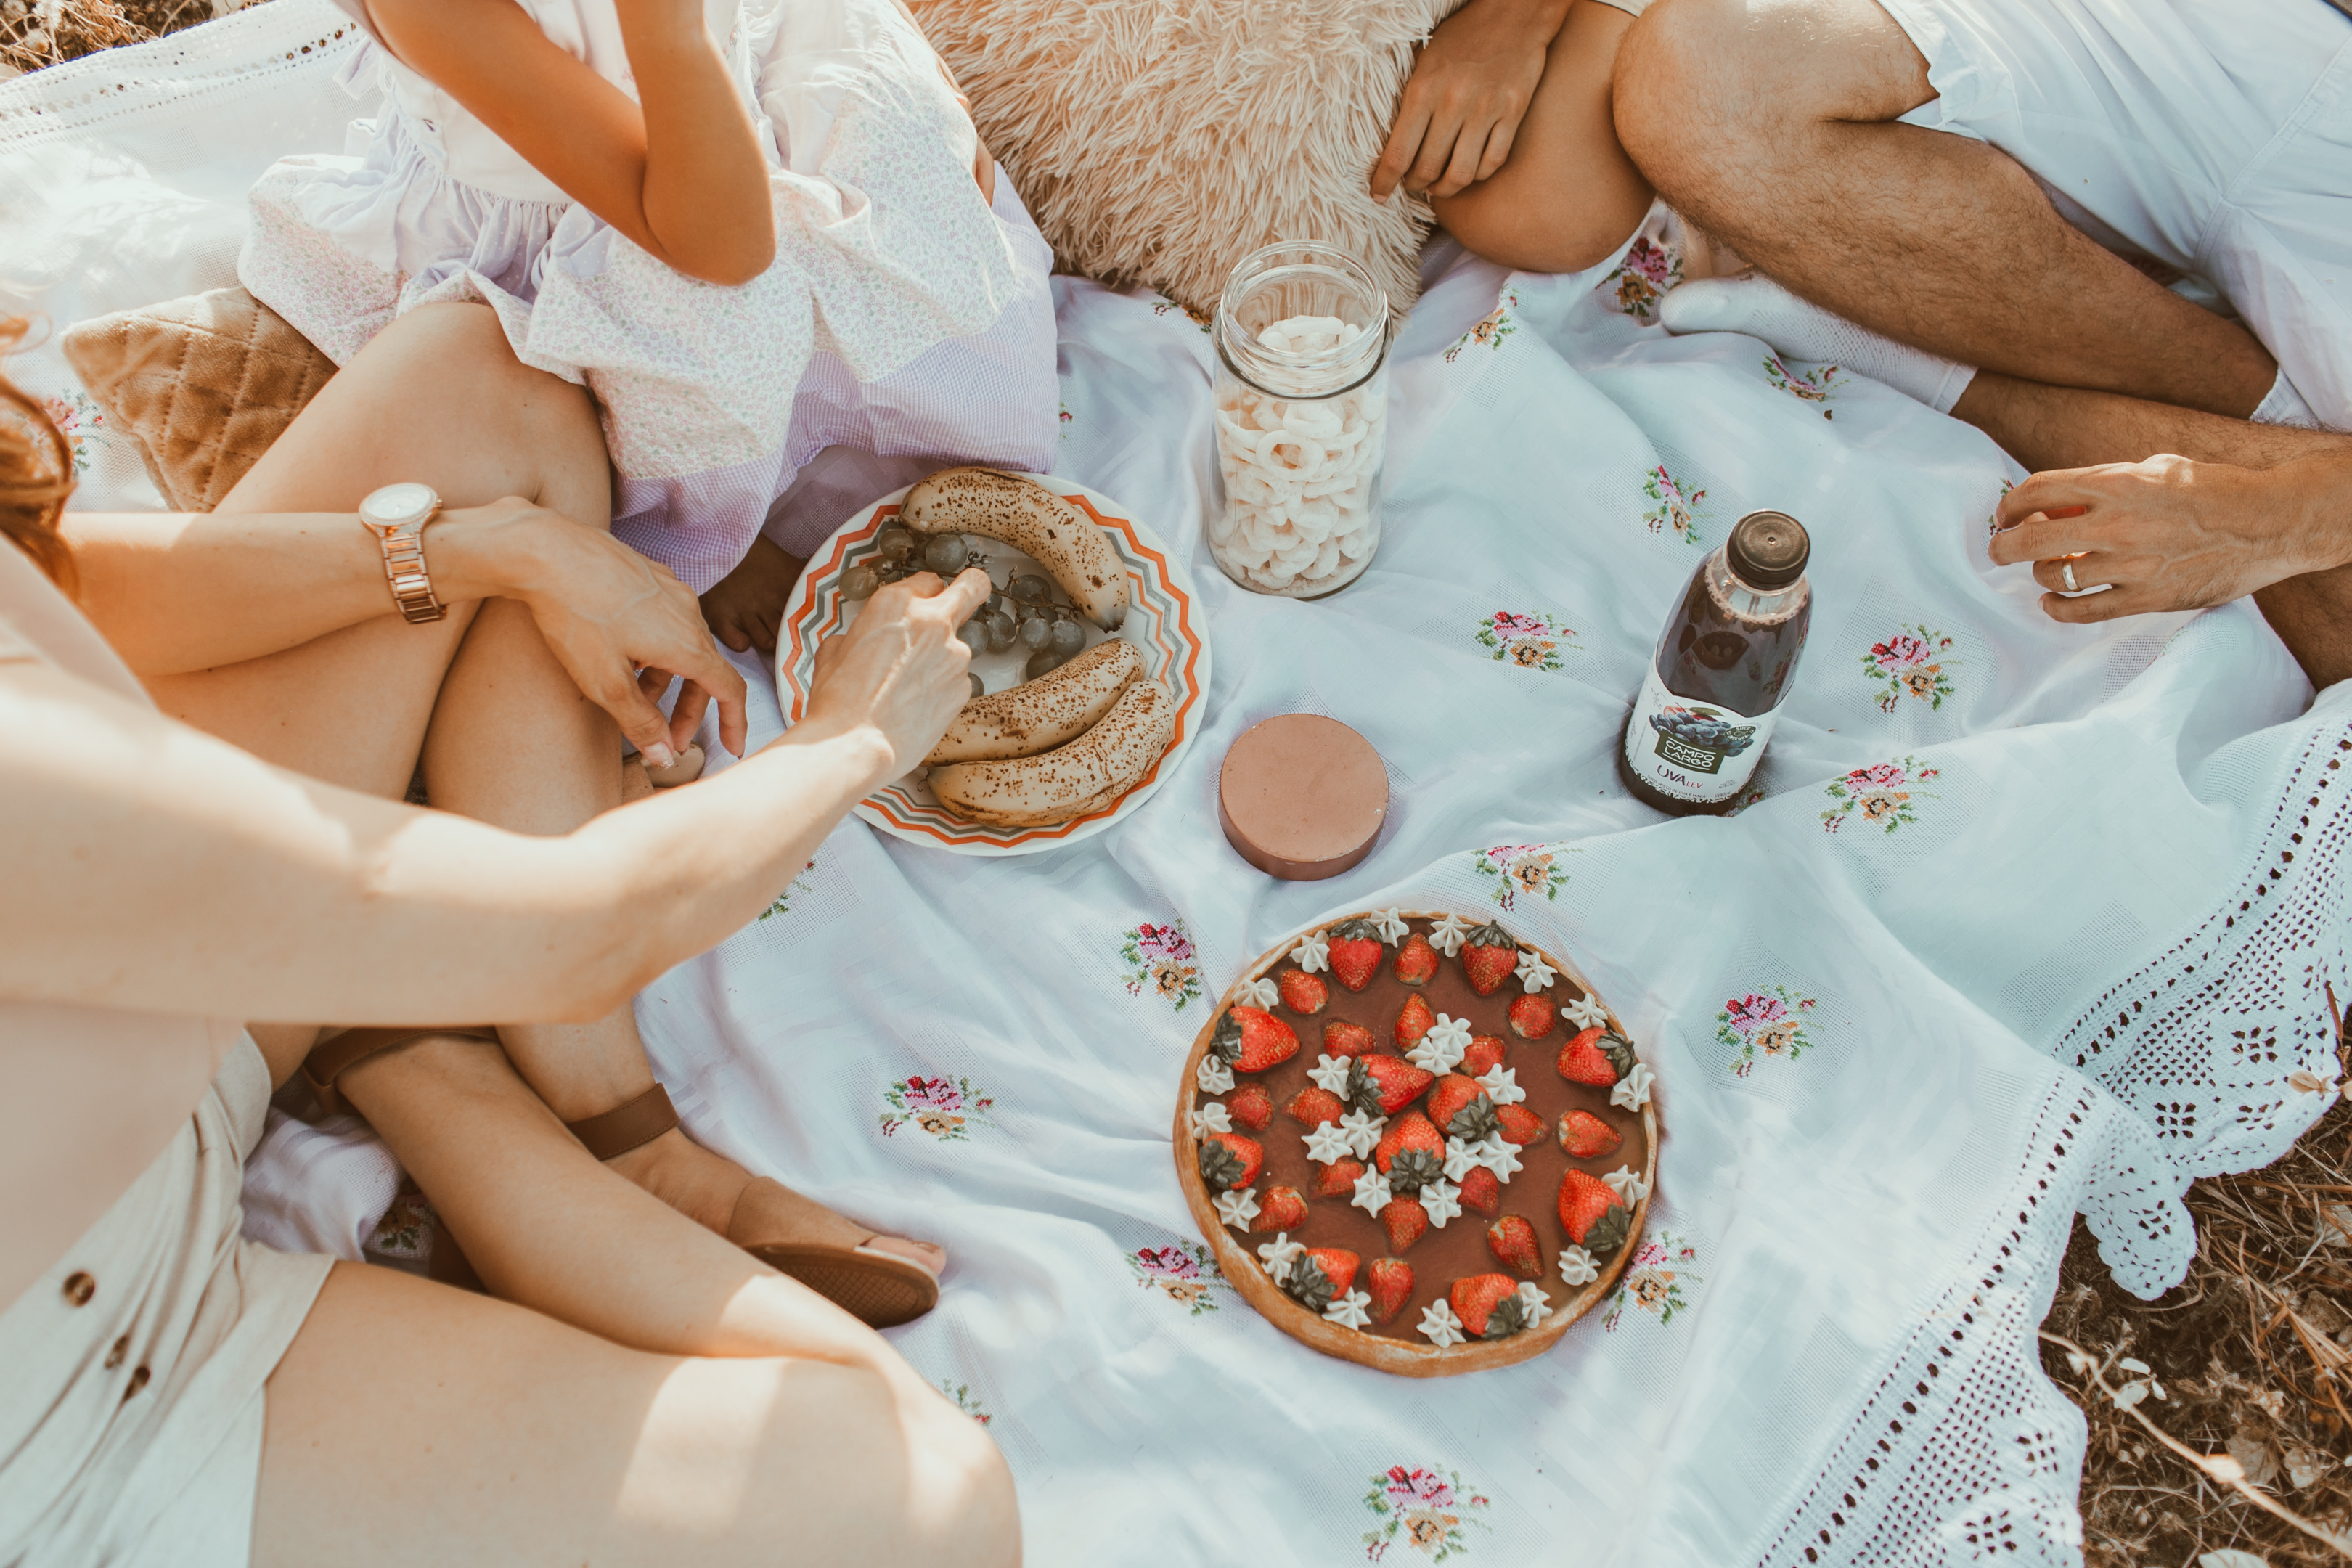 One of the easiest ways to enjoy outdoor dining at home is through picnic.